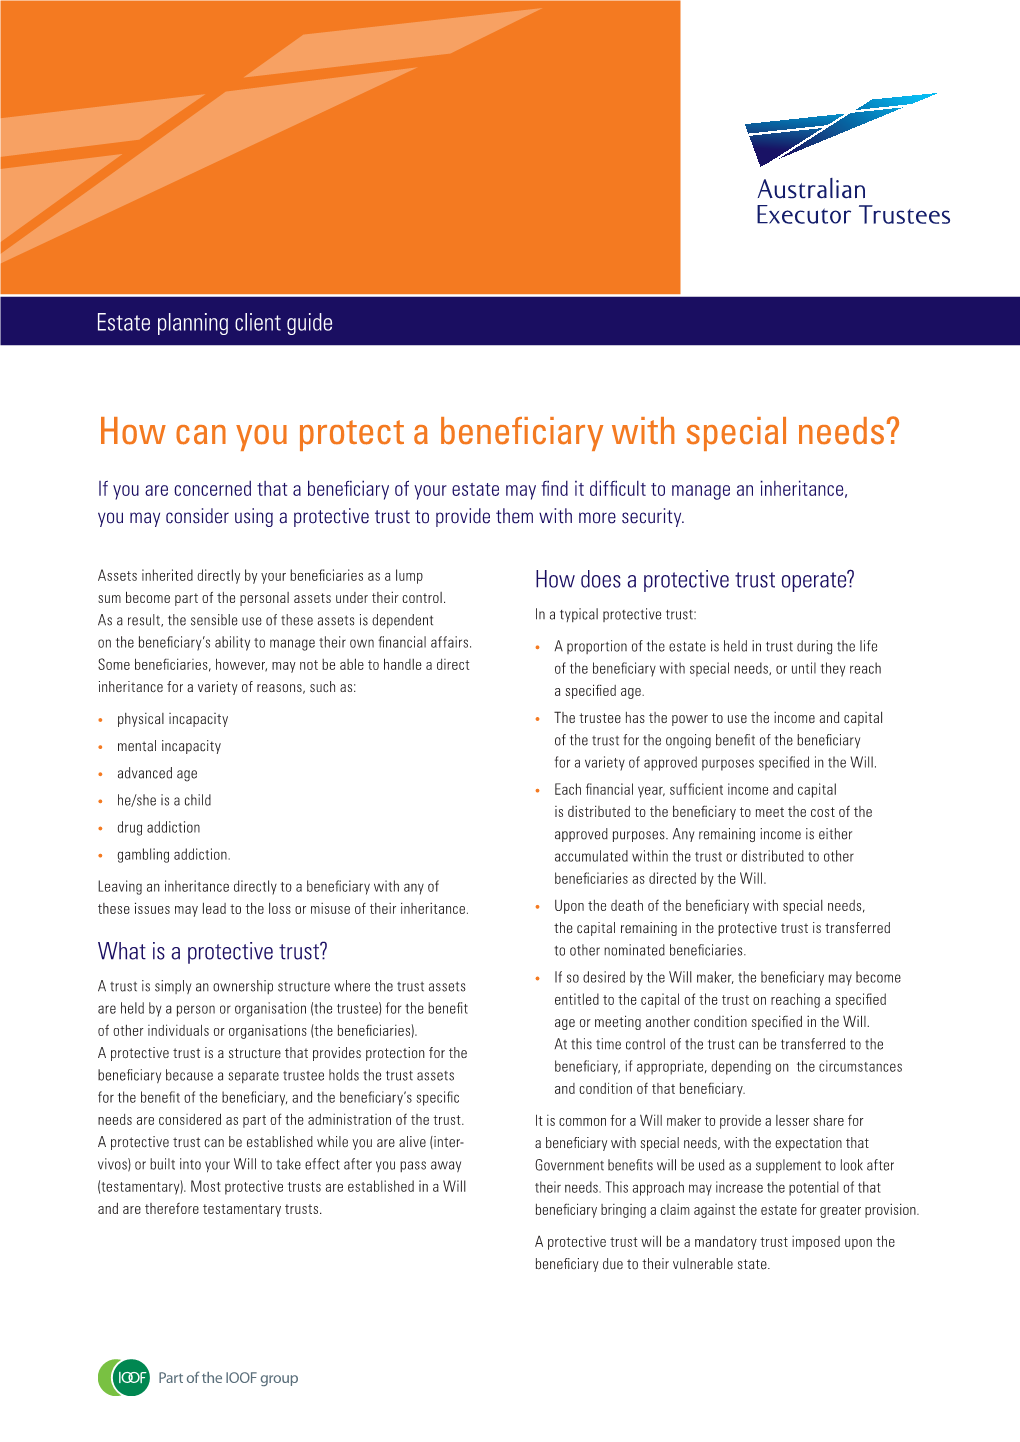 How Can You Protect a Beneficiary with Special Needs?